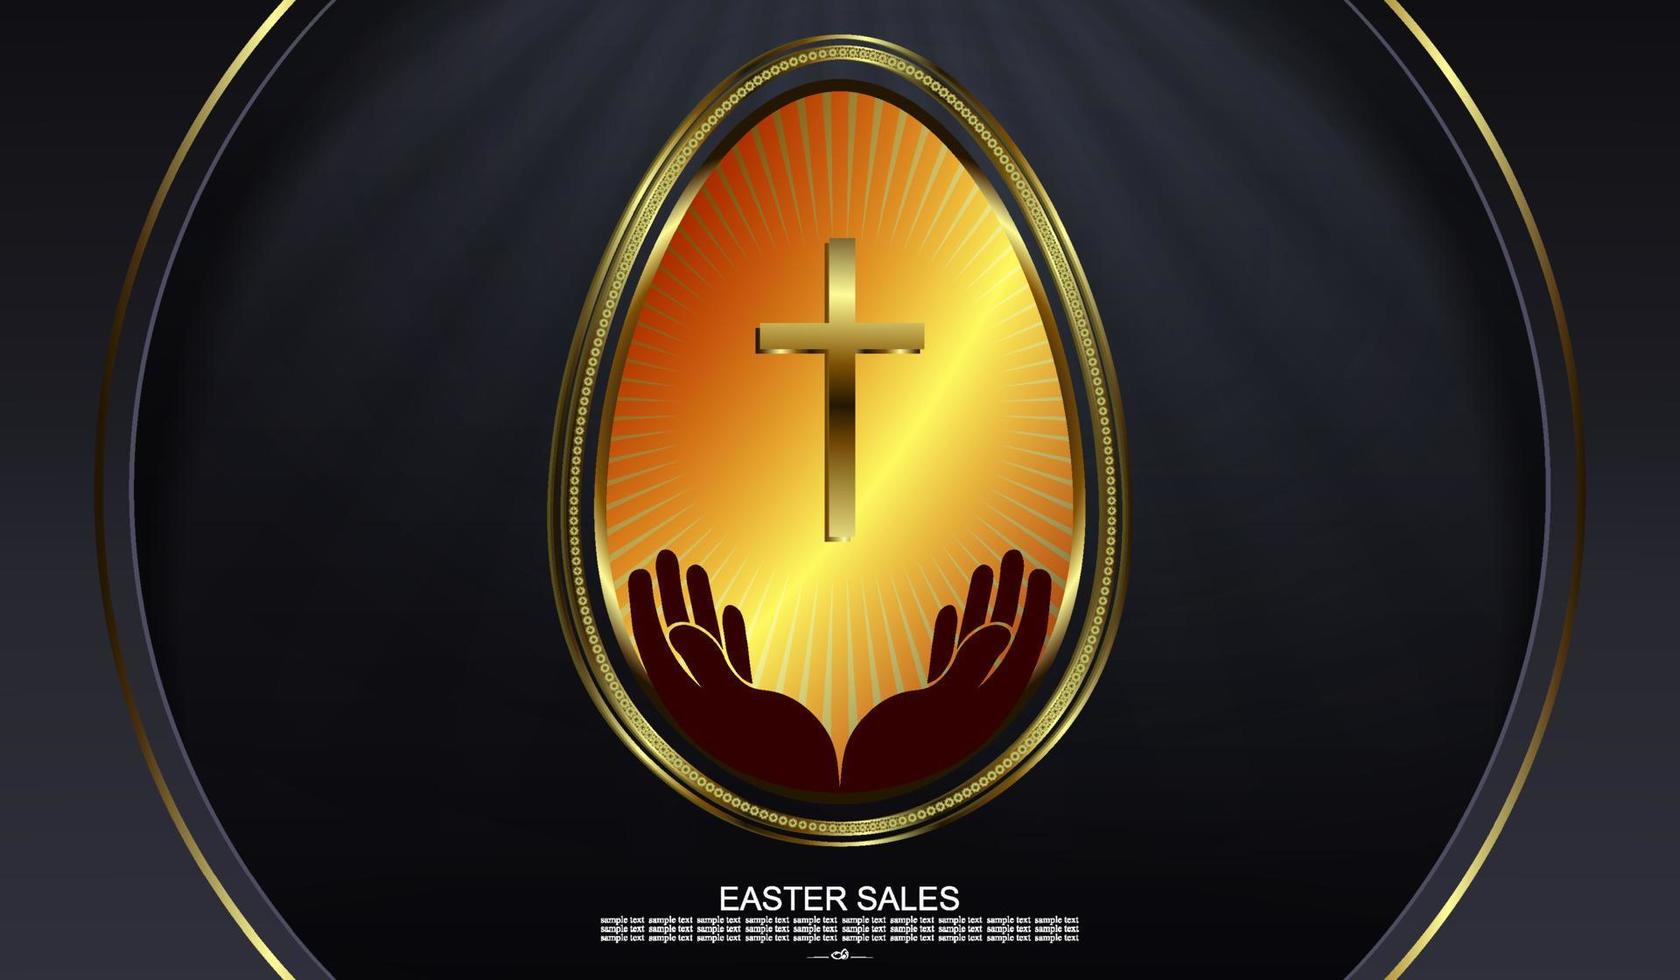 Easter black design with arcs, abstract egg with gold border, cross and hands. vector